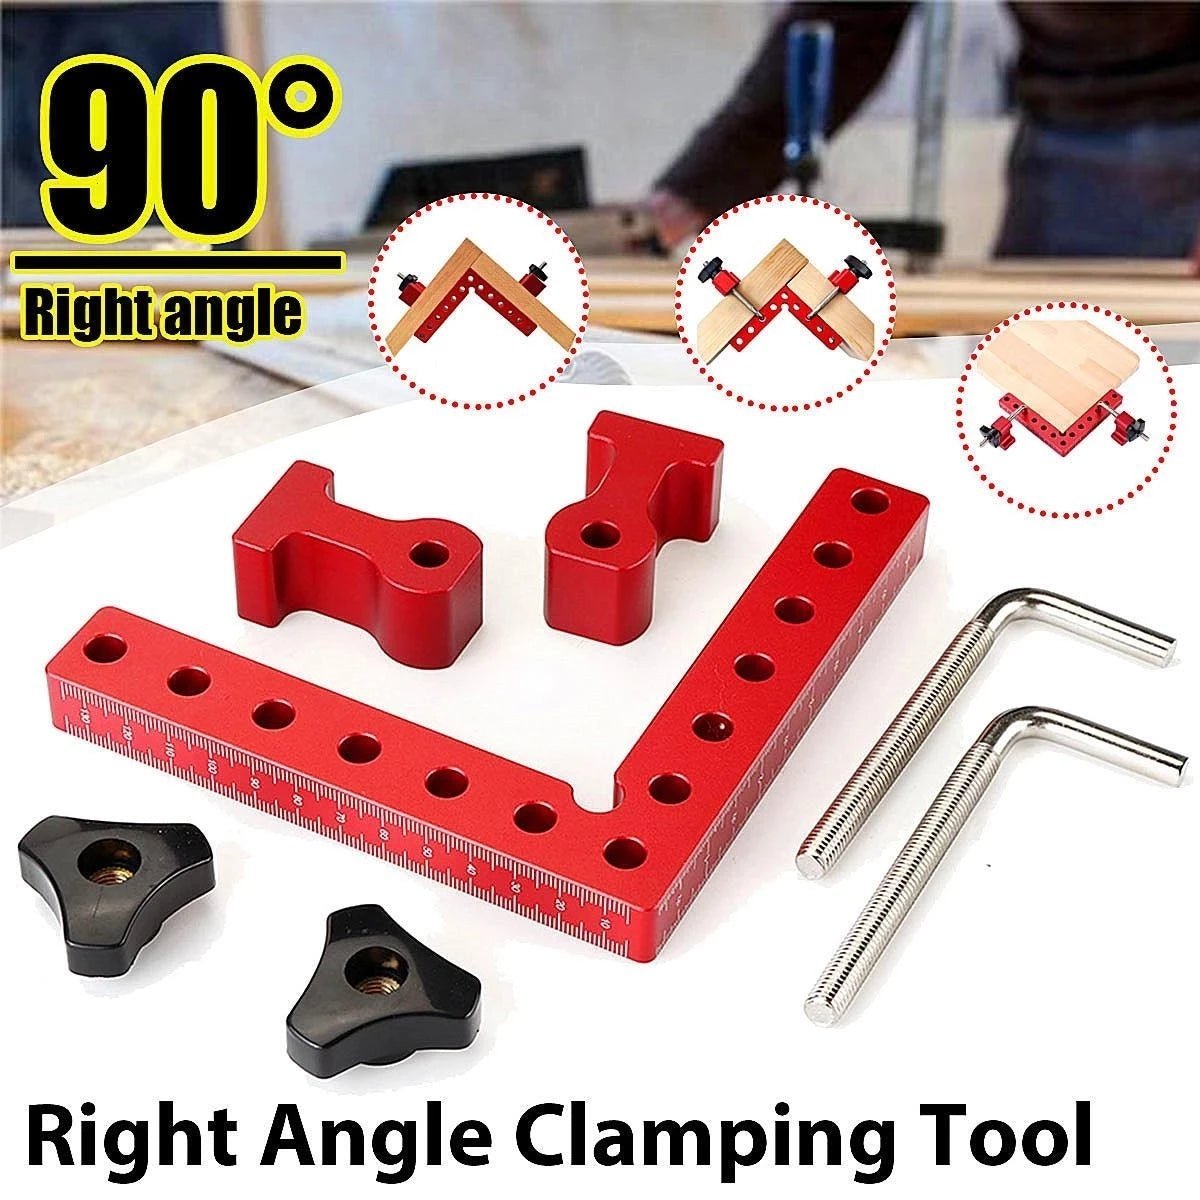 🔥Last Day Promotion 50% OFF🛠CLAMPING SQUARES PLUS & CSP CLAMPS🔥BUY 2 FREE SHIPPING